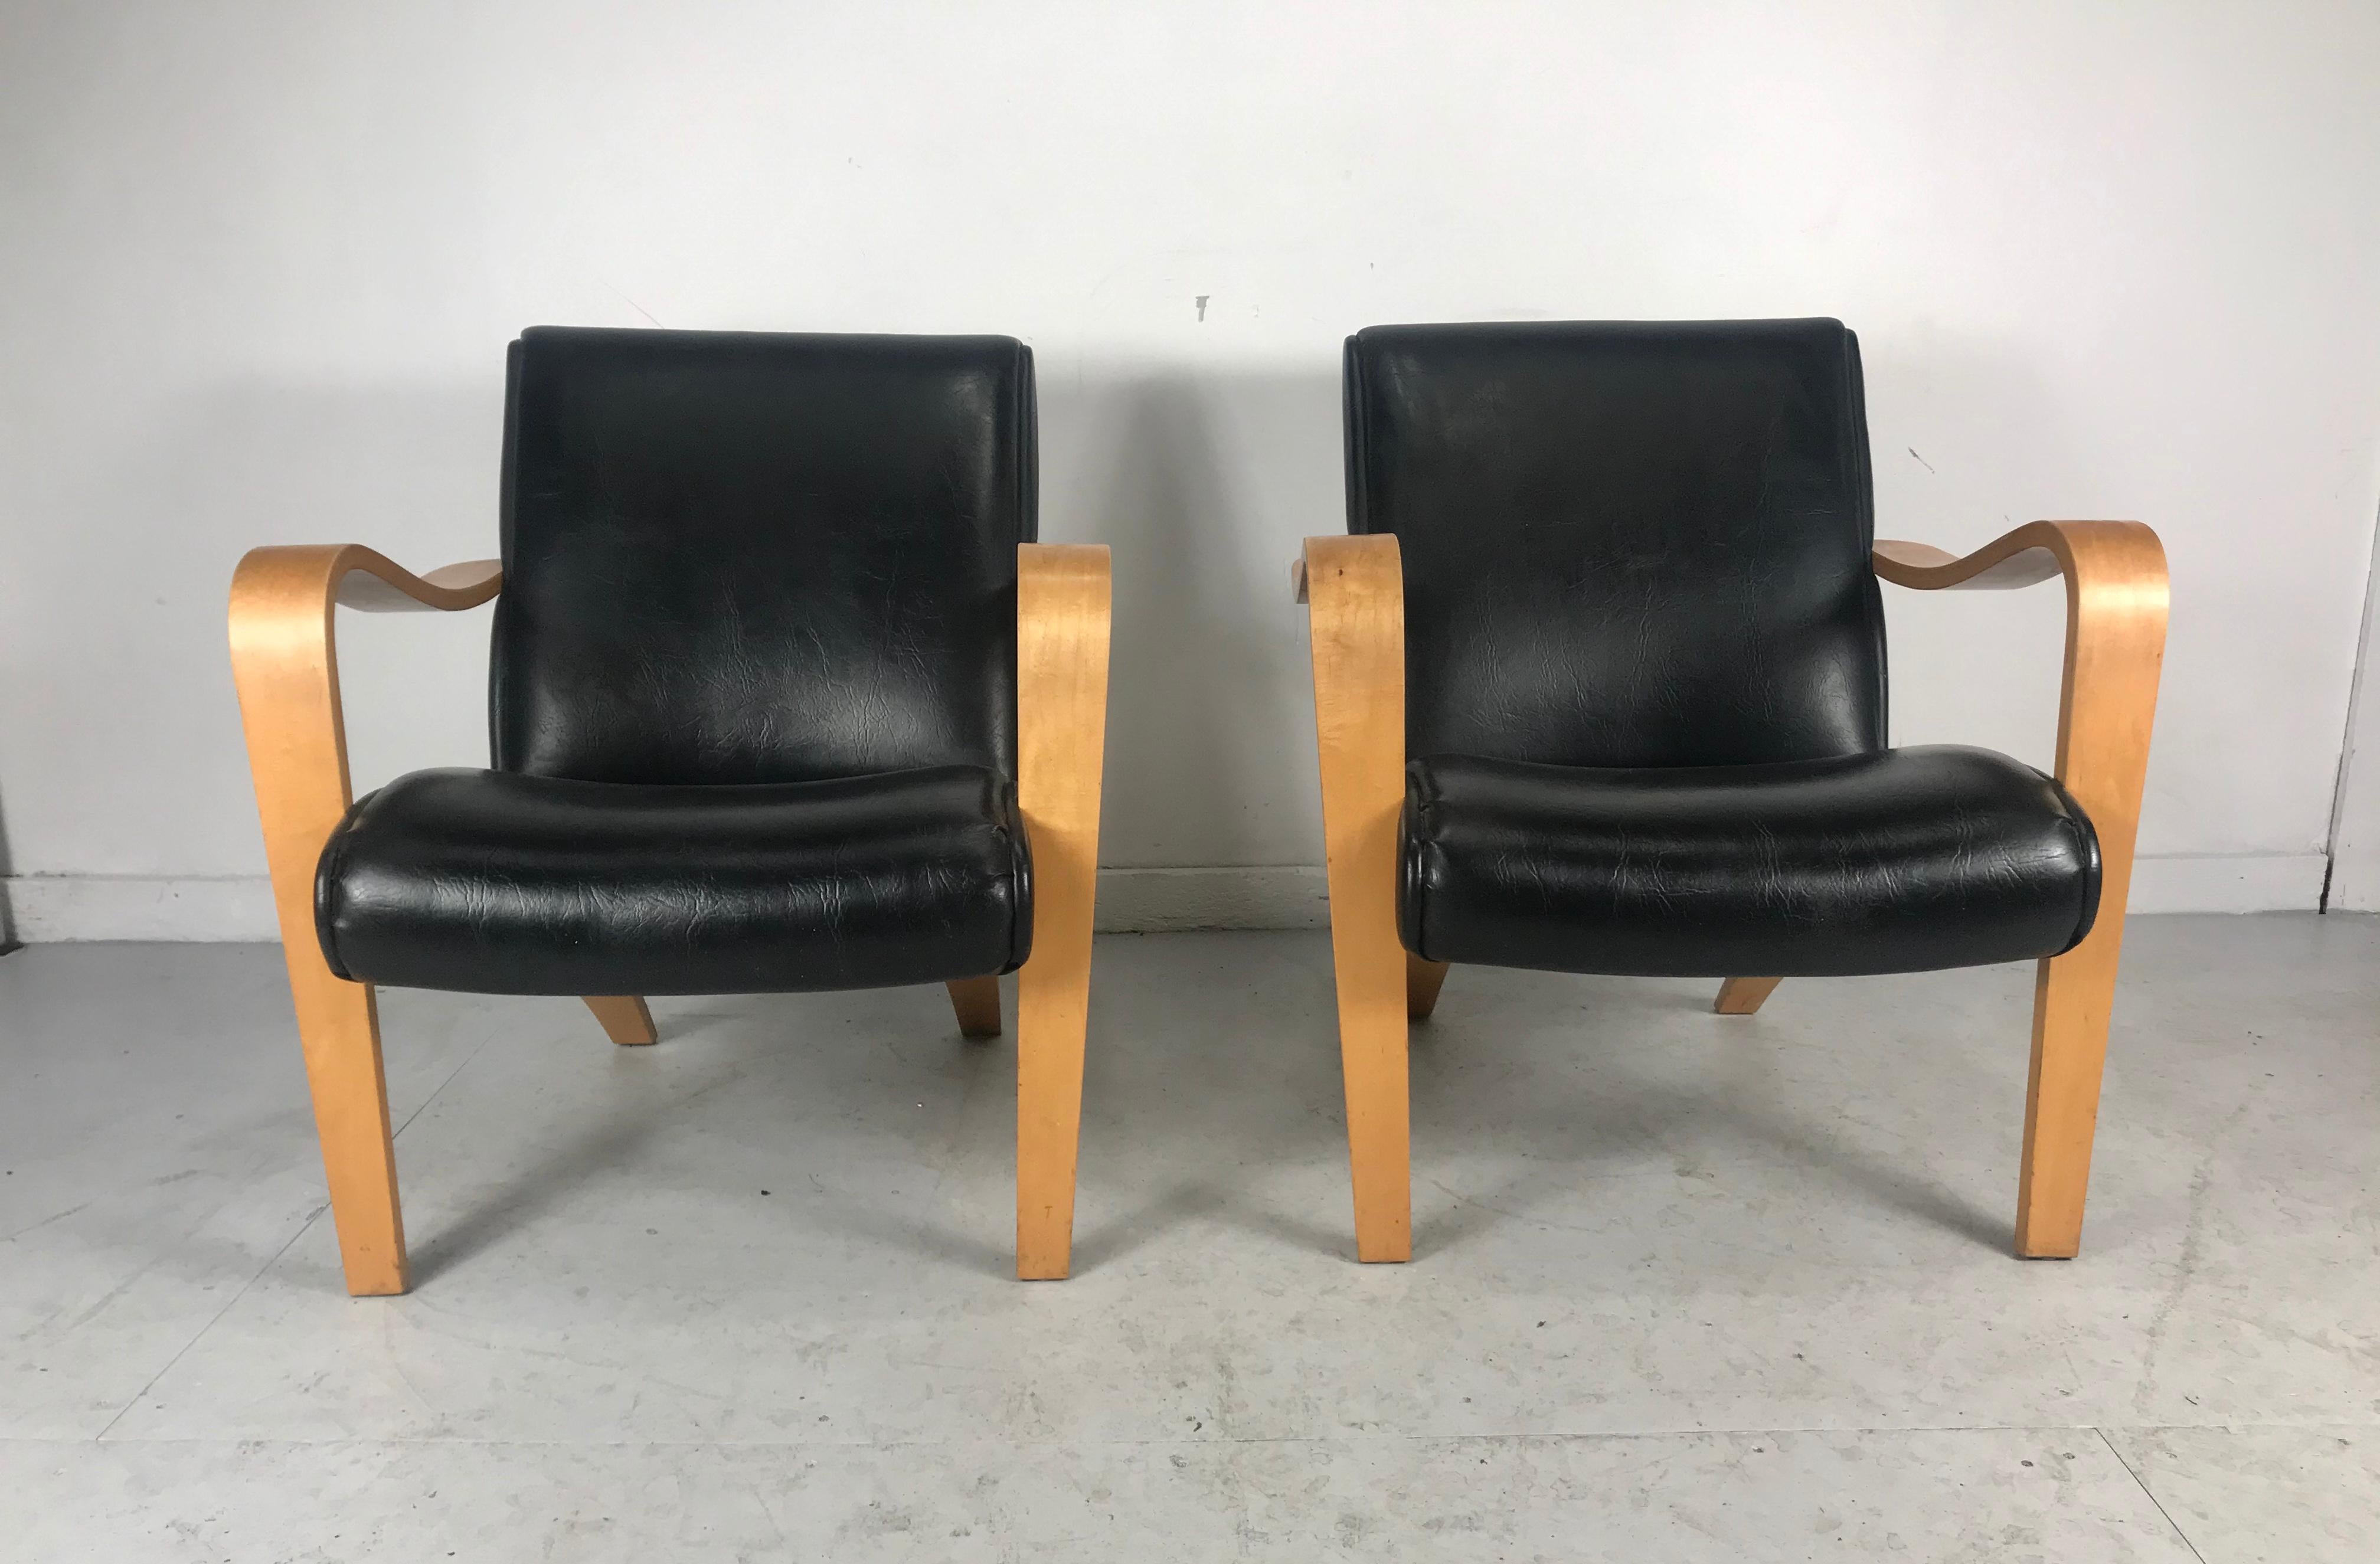 American Pair of Classic Modernist Bent Plywood Arm Lounge Chairs by Thonet